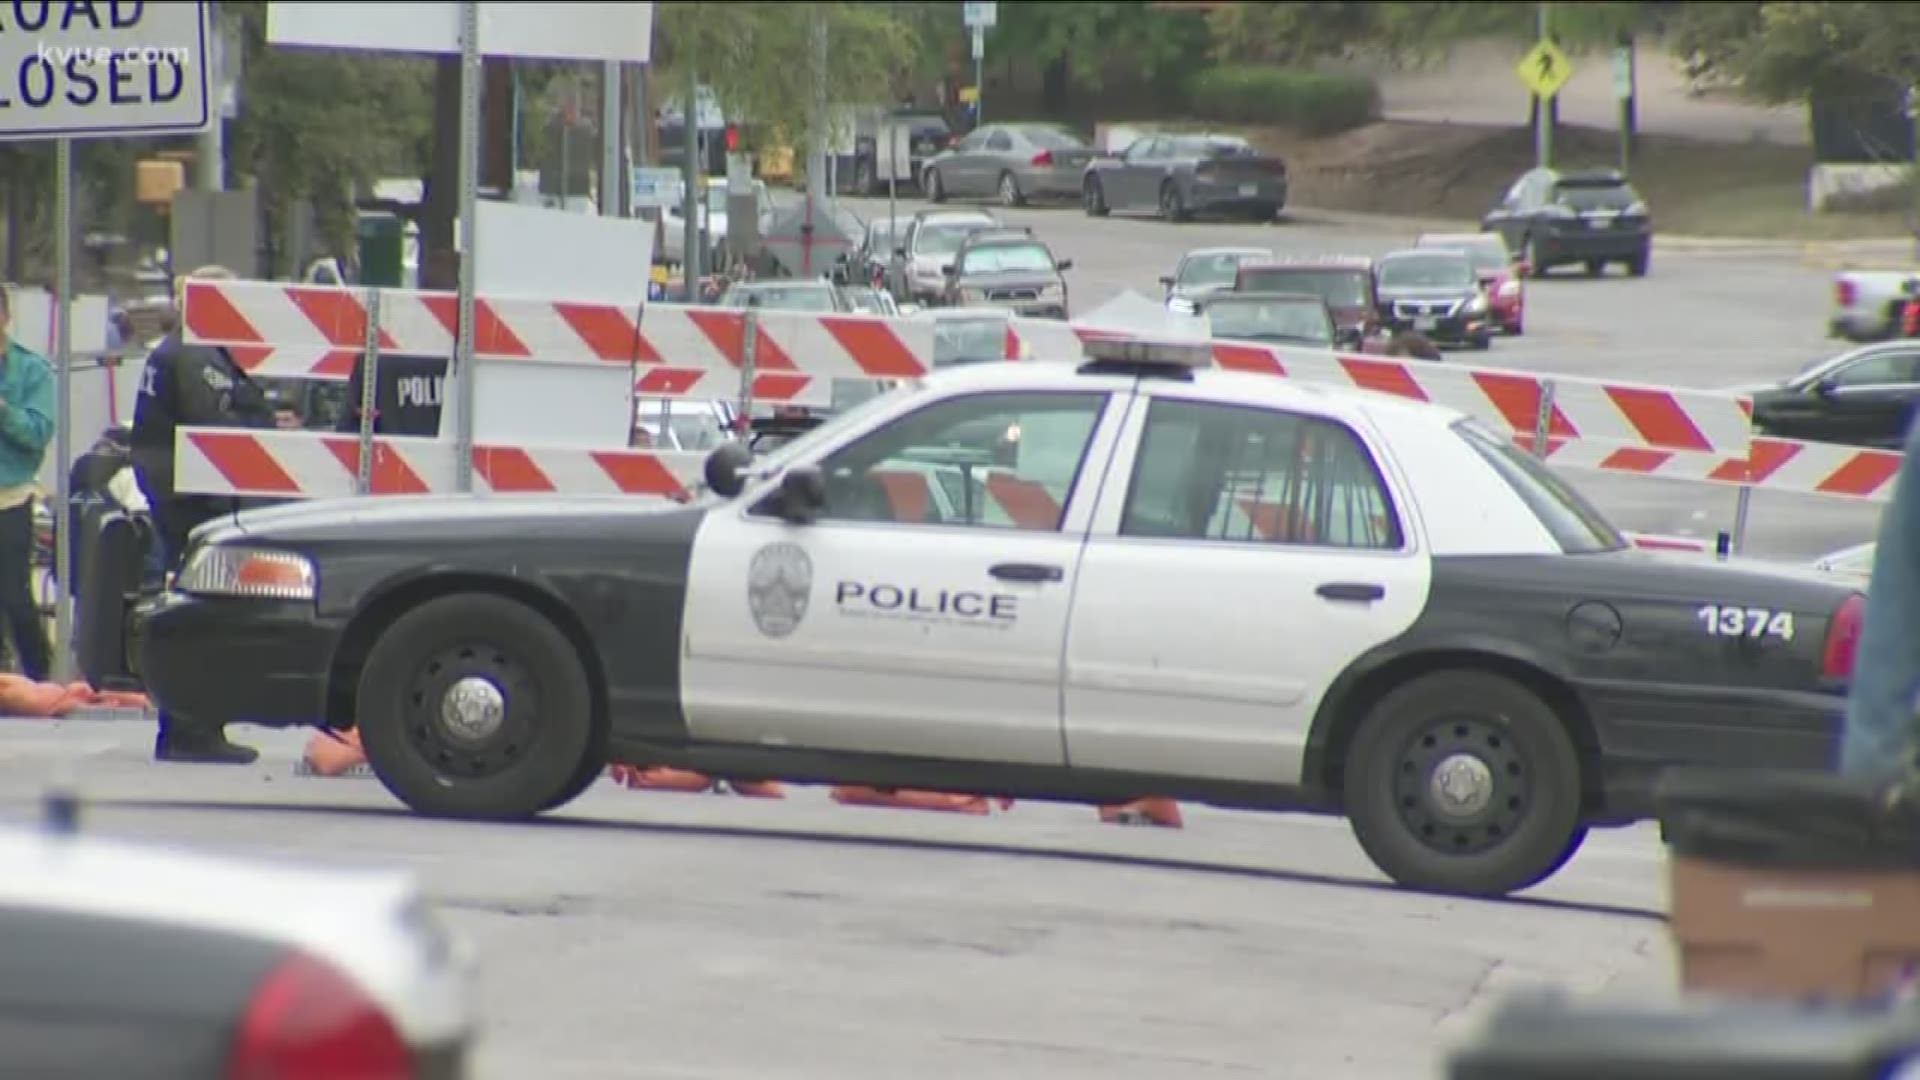 Austin police are adding more officers downtown during the last days of SXSW in response to the attacks in New Zealand.